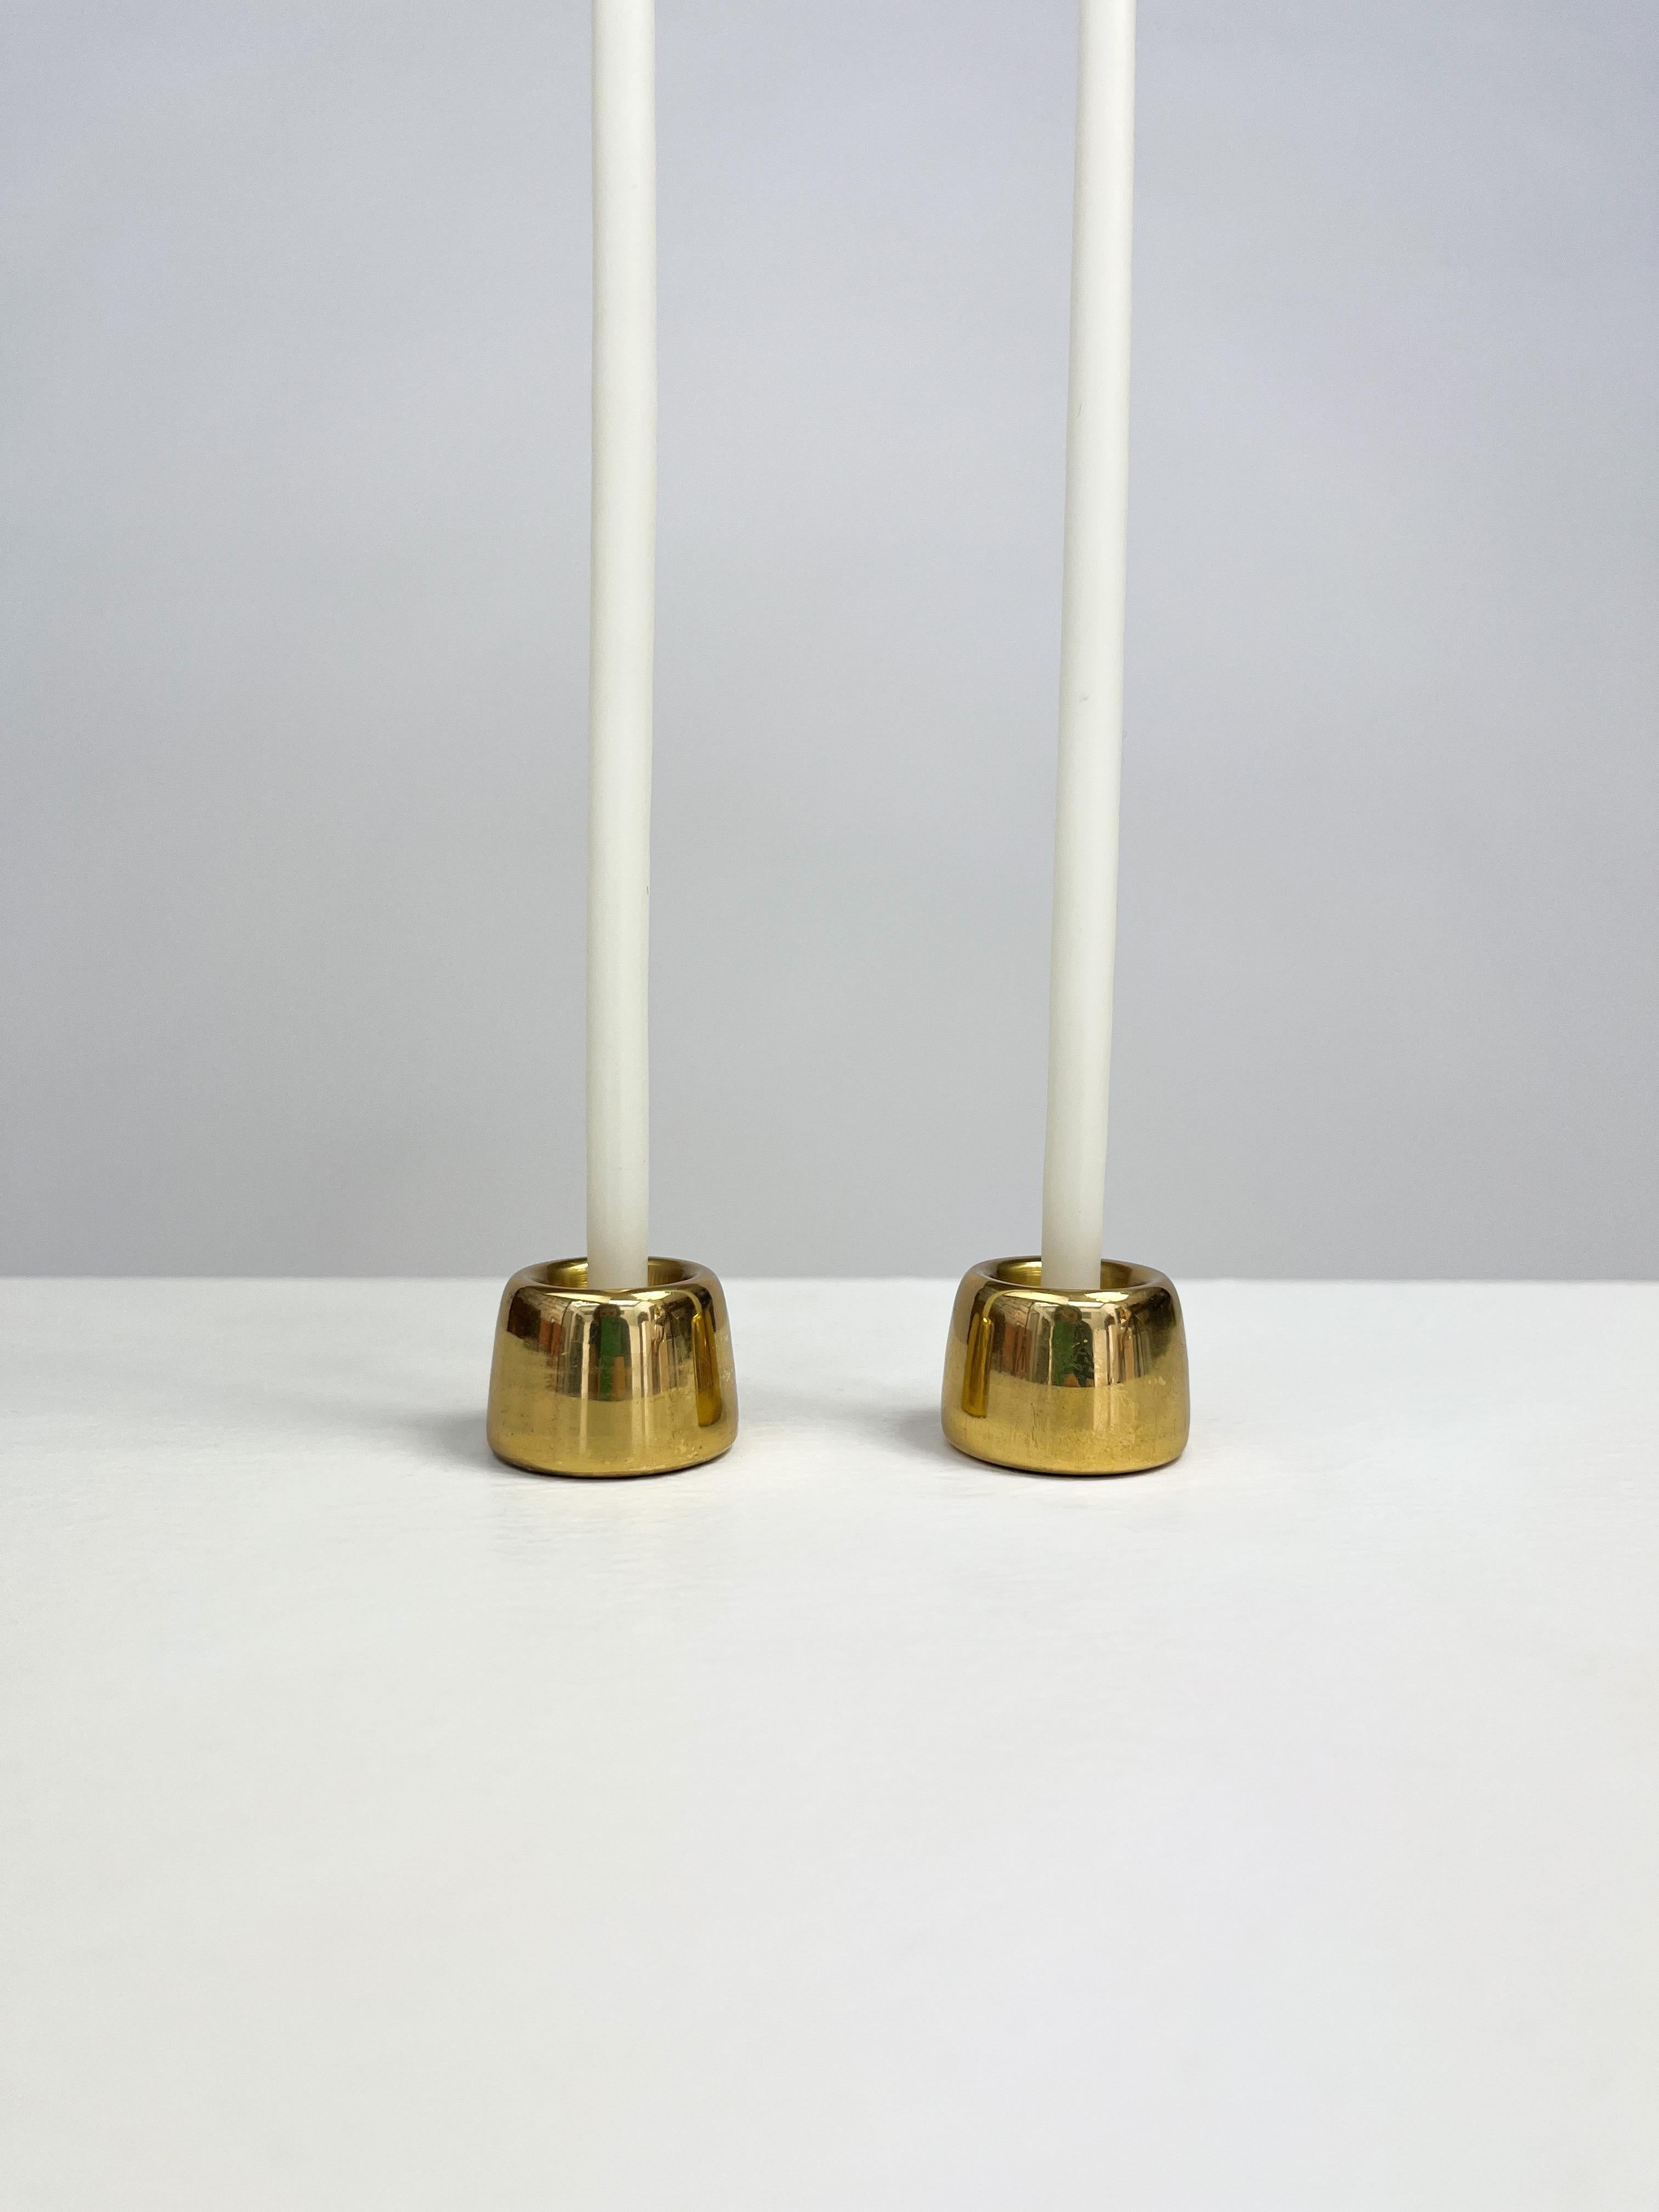 Pair of miniature candle sticks by Hans-Agne Jakobsson, model L 97 for thin long candles, hand-crafted by the Hans-Agne Jakobsson AB in Sweden, 1960s.
 
Made of solid brass, nicely aged with patina. Marked underneath.
 
Height: 2 cm
Width: 3 cm